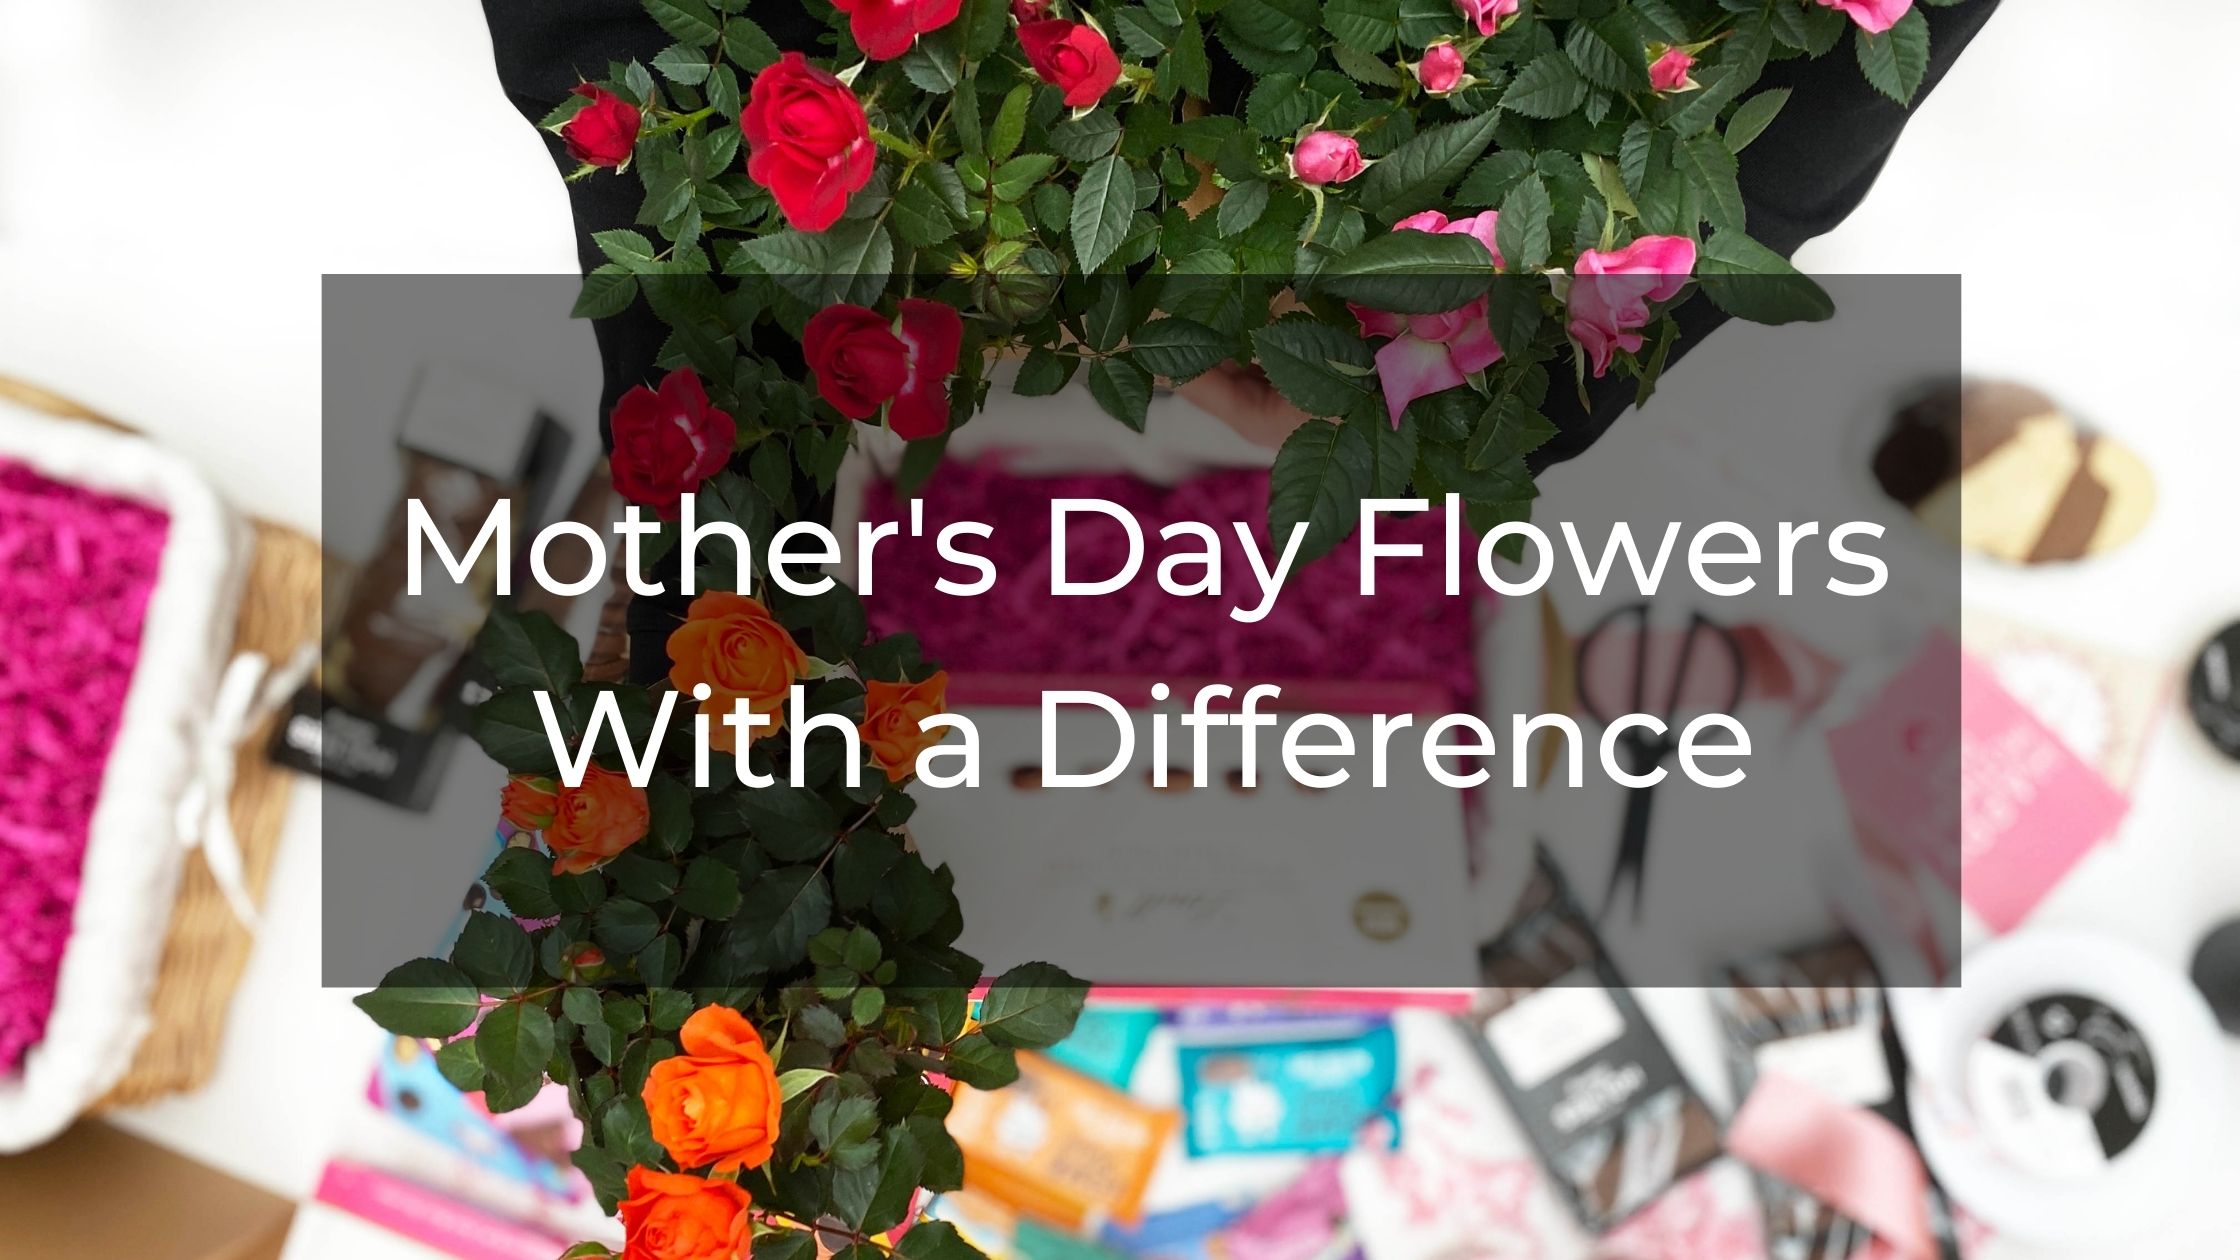 Mother's Day Flowers With a Difference